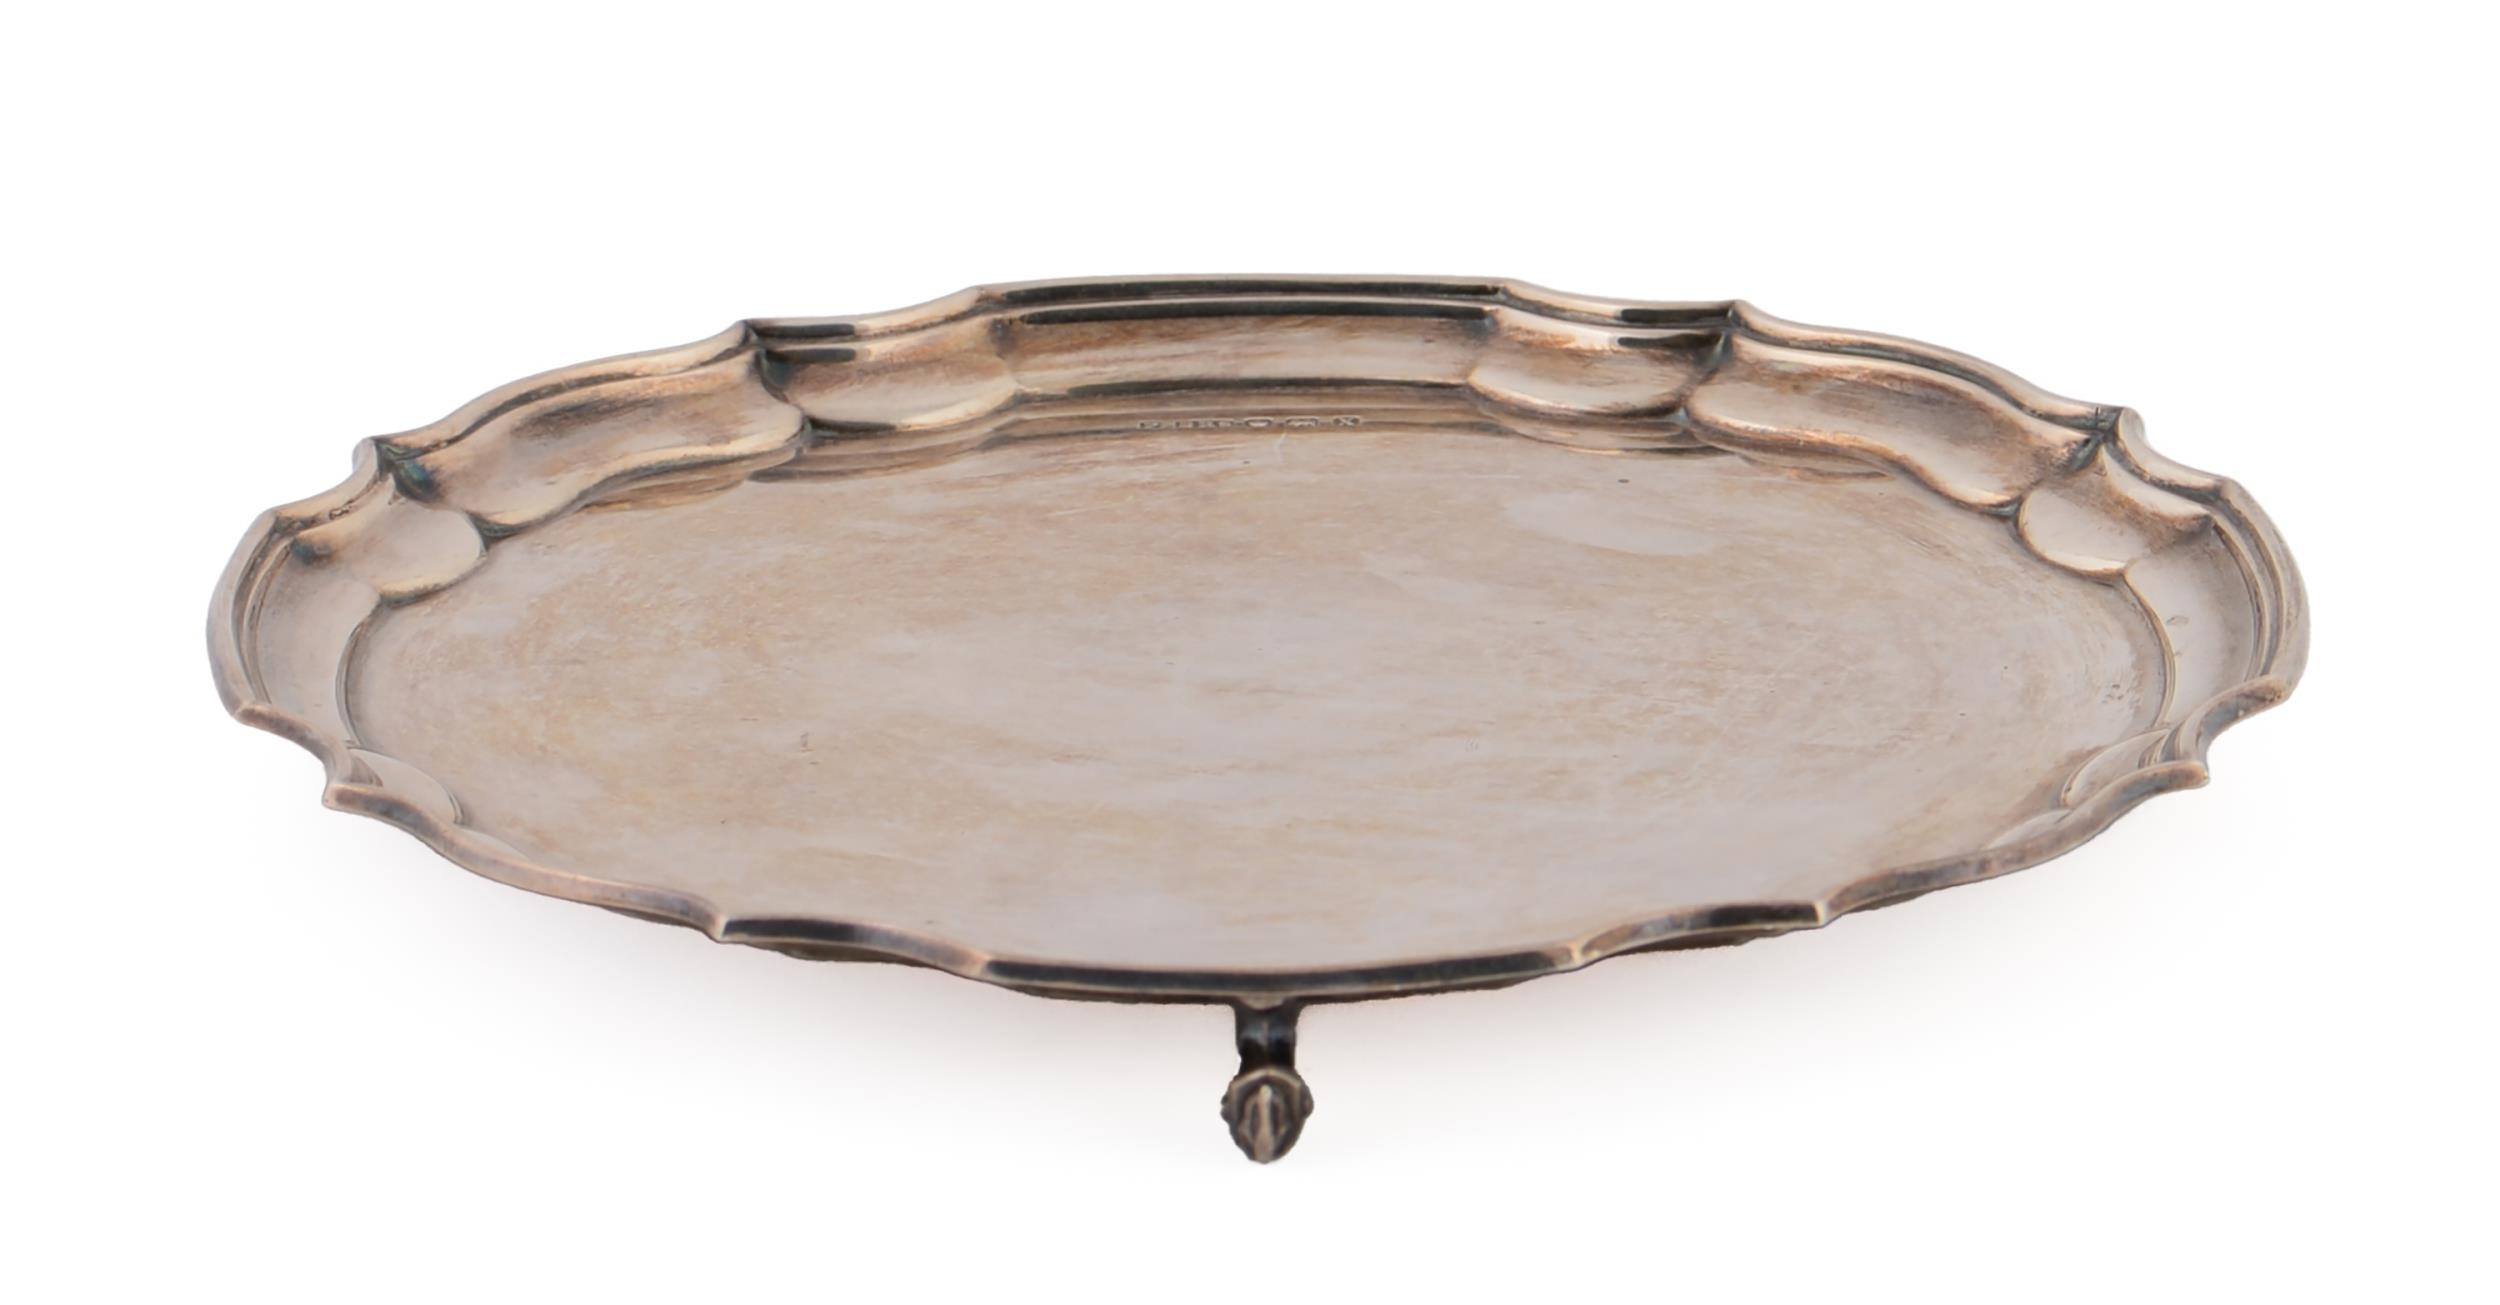 An Elizabeth II silver salver, on three volute feet, by Pinder Brothers, Sheffield 1965, 15ozs 2dwts